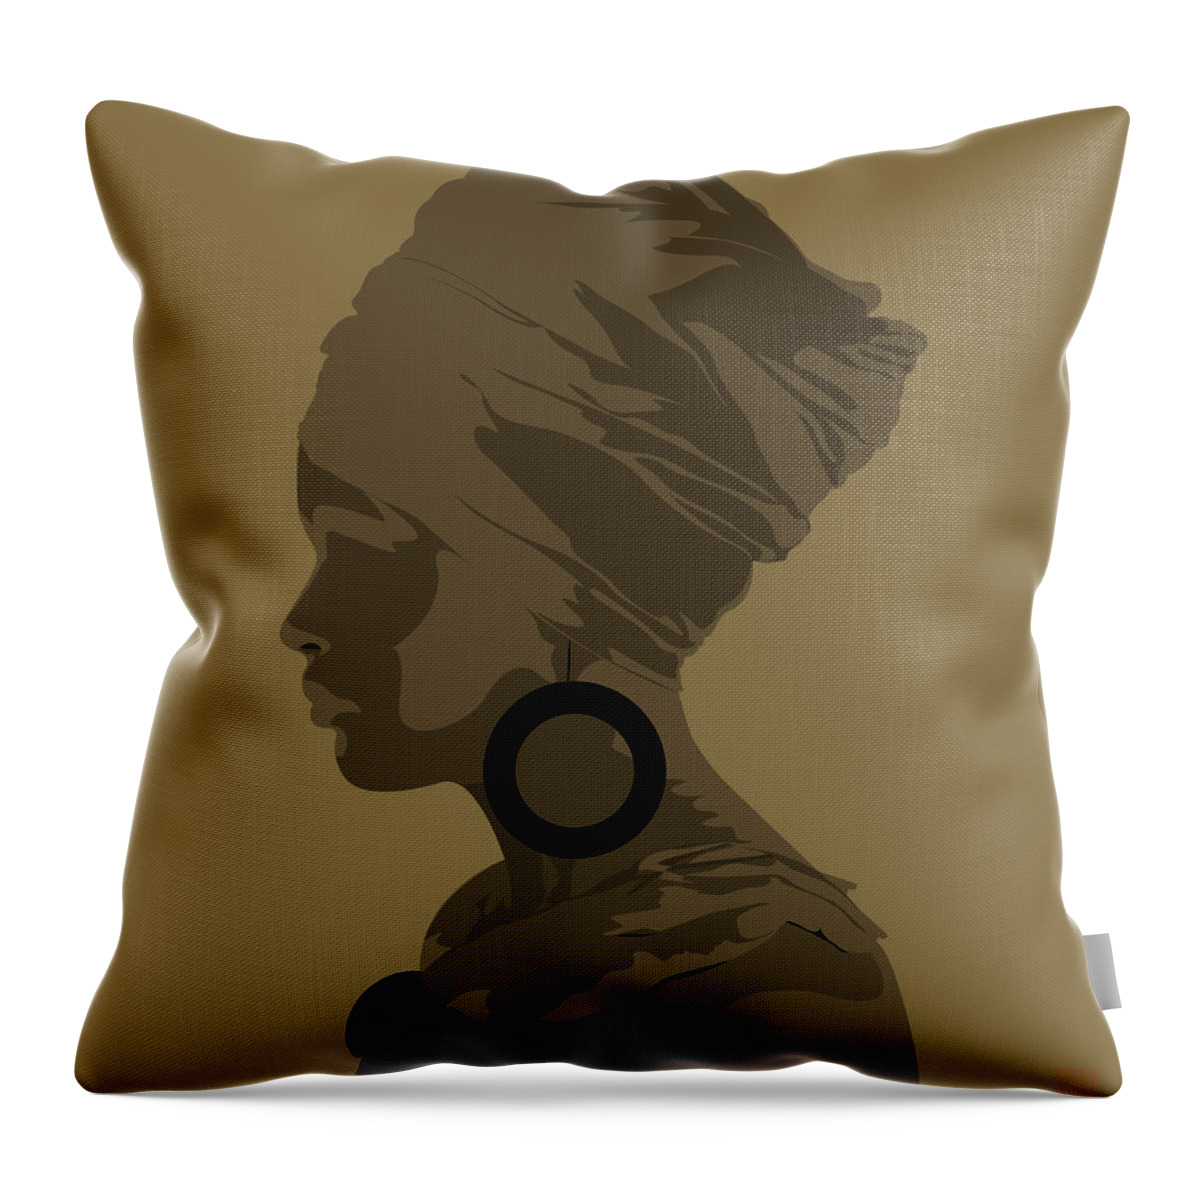 Queen Throw Pillow featuring the digital art Golden Lady by Scheme Of Things Graphics